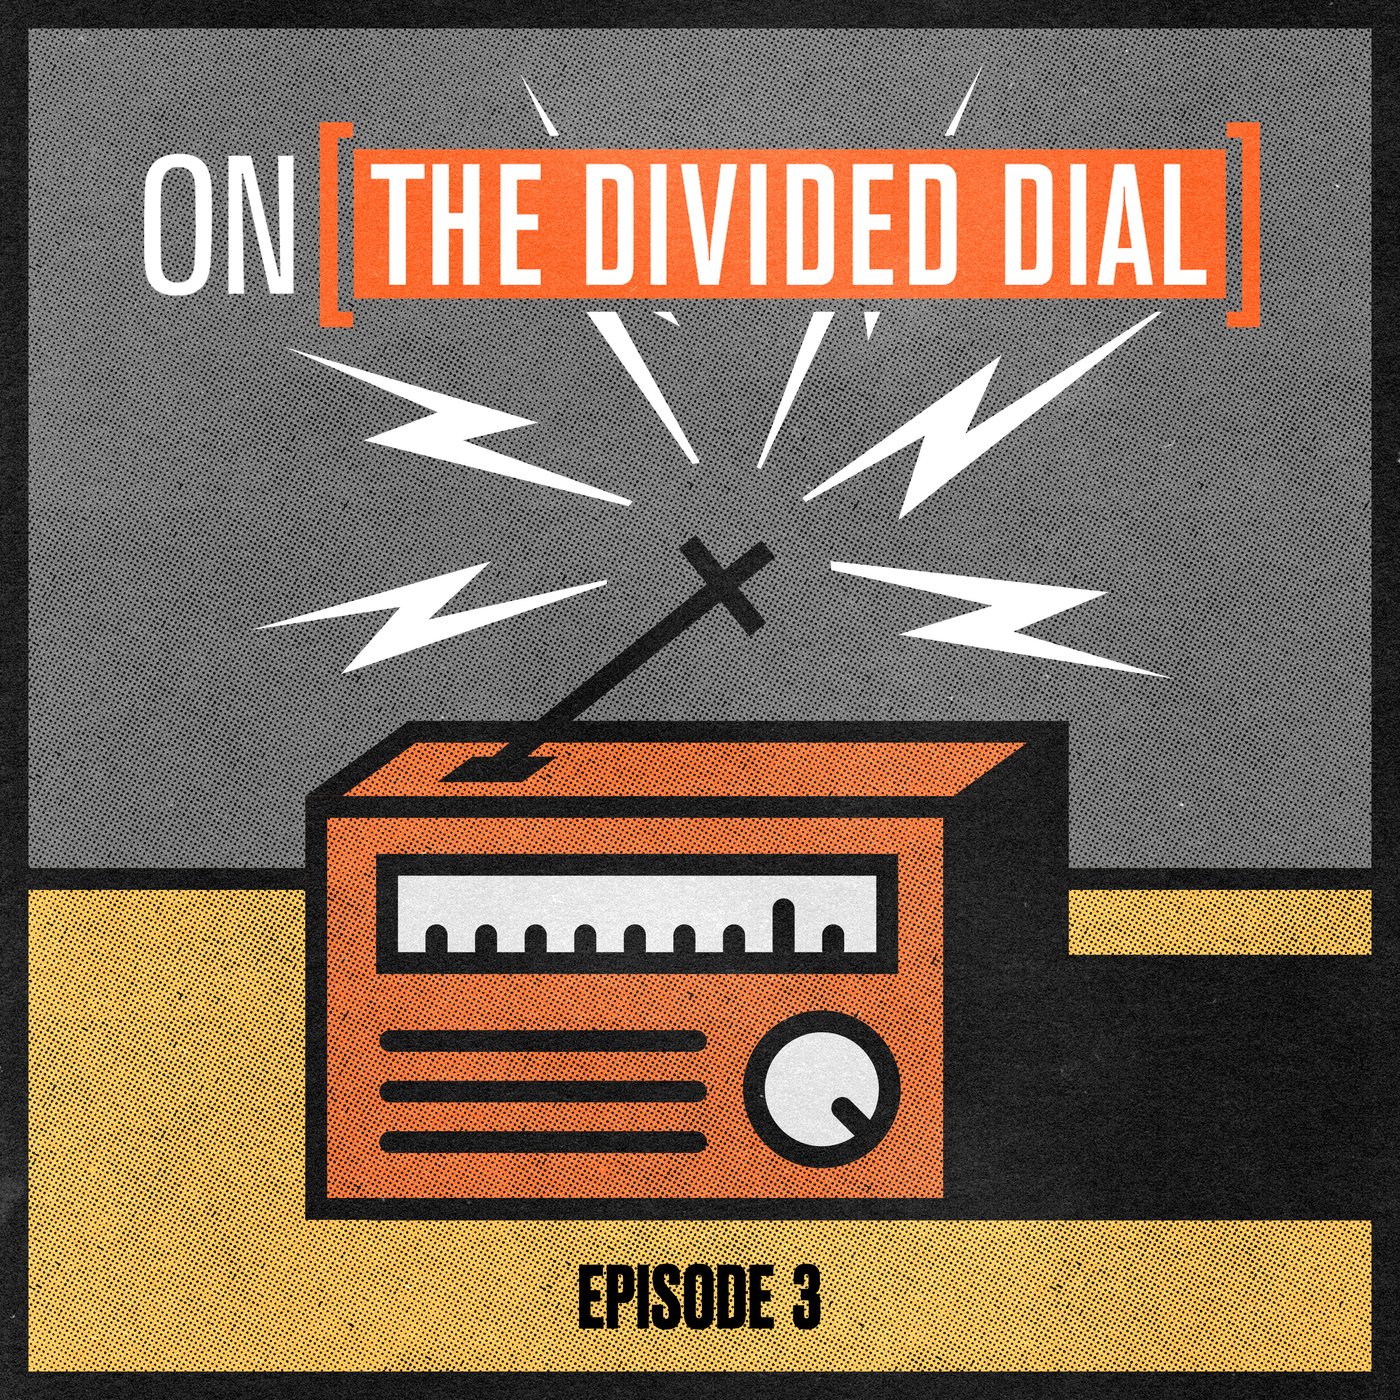 Episode 3 - The Divided Dial